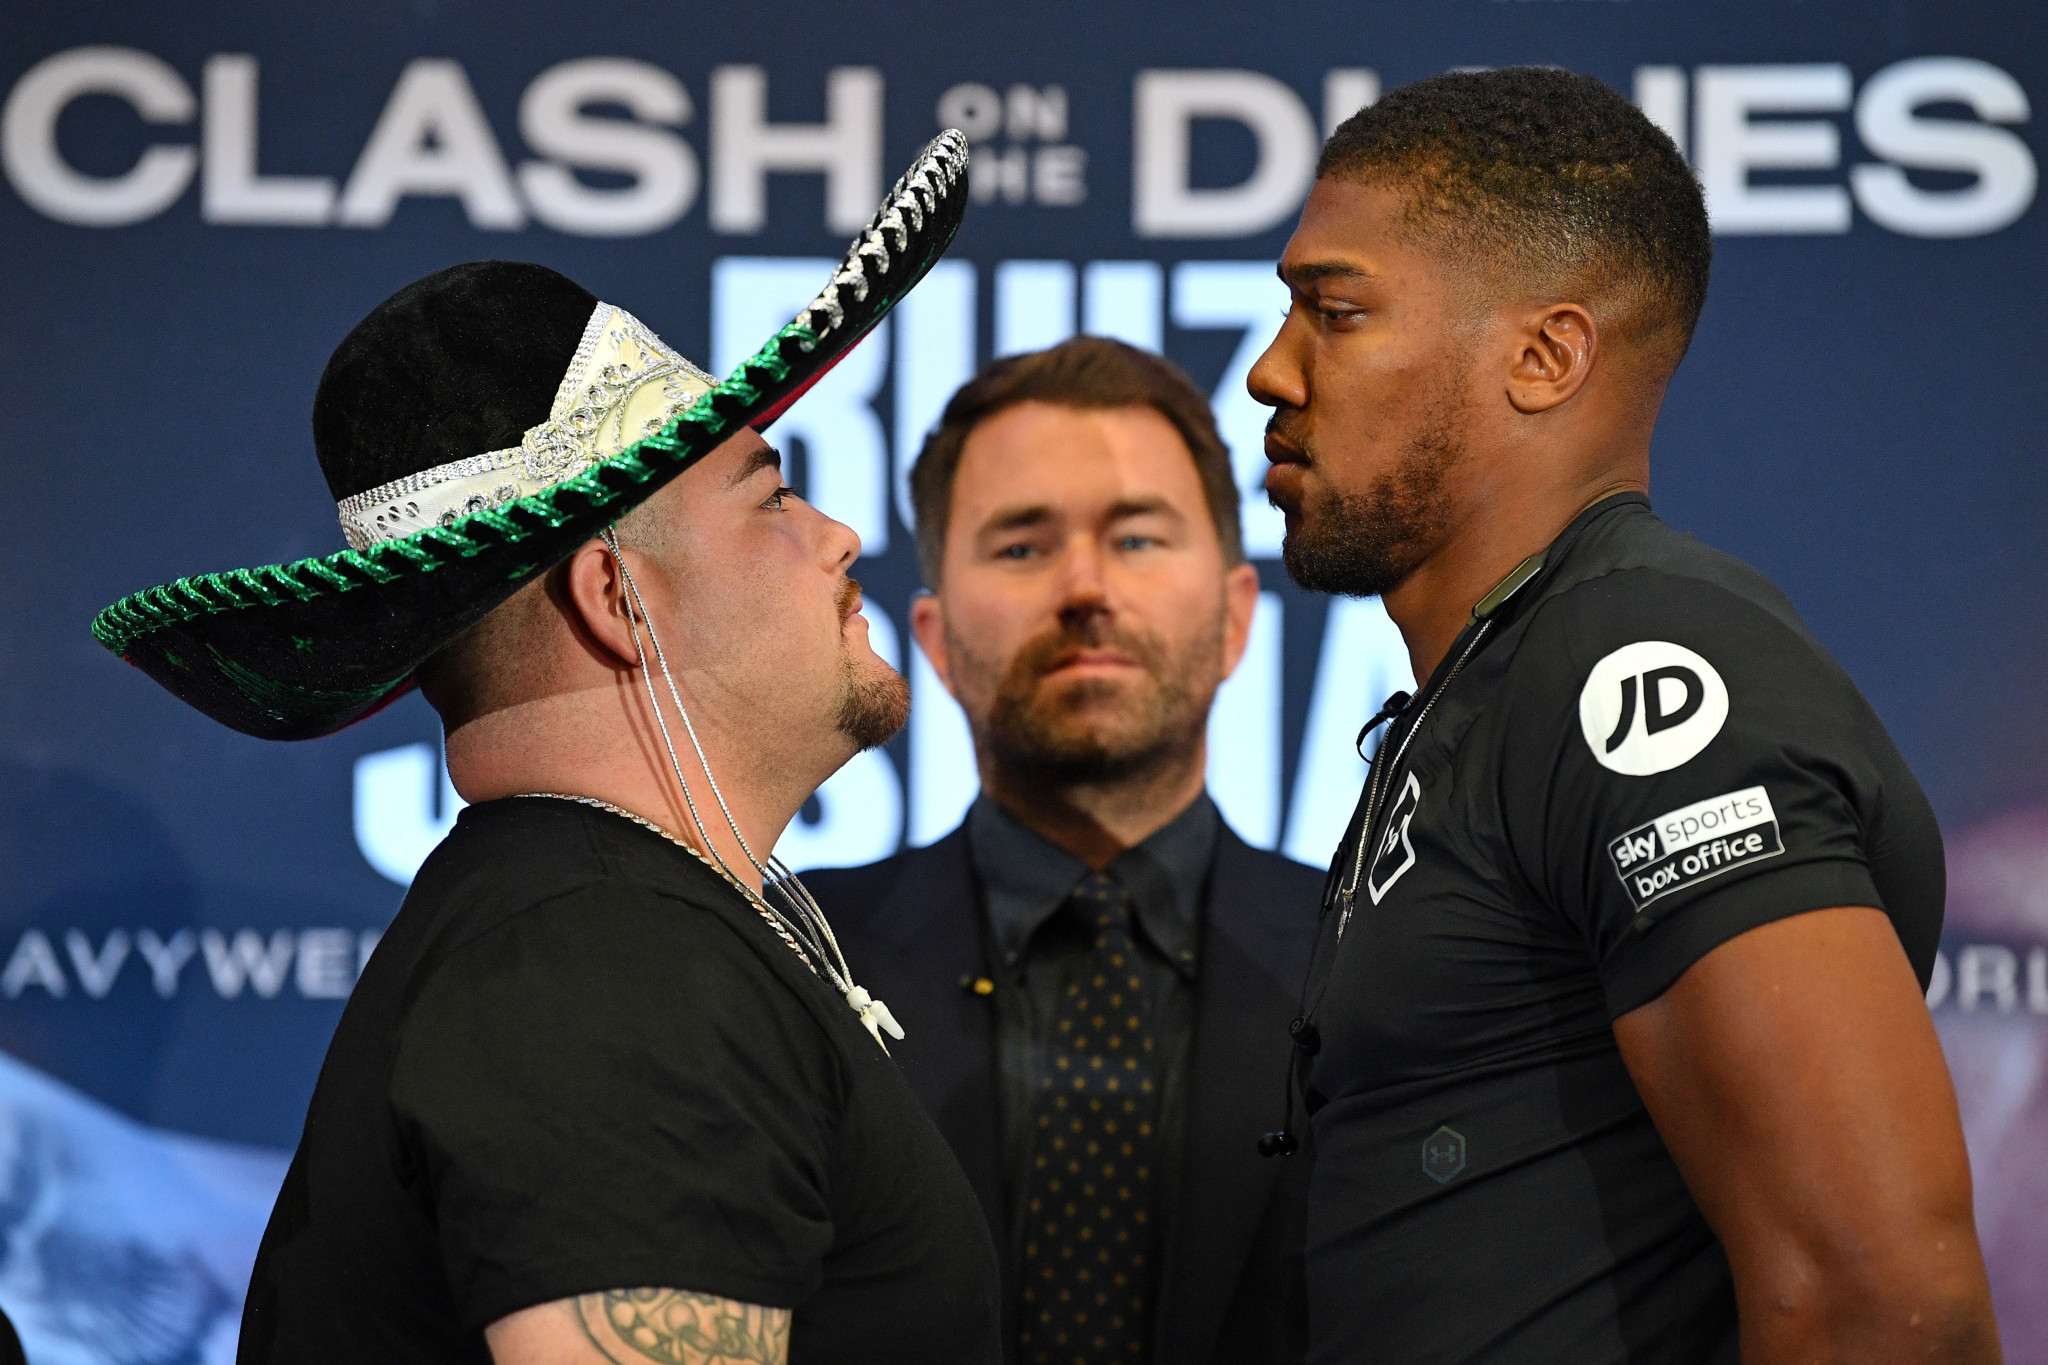 Andy Ruiz and Anthony Joshua meet in a rematch in Saudi Arabia in December ©Getty Images